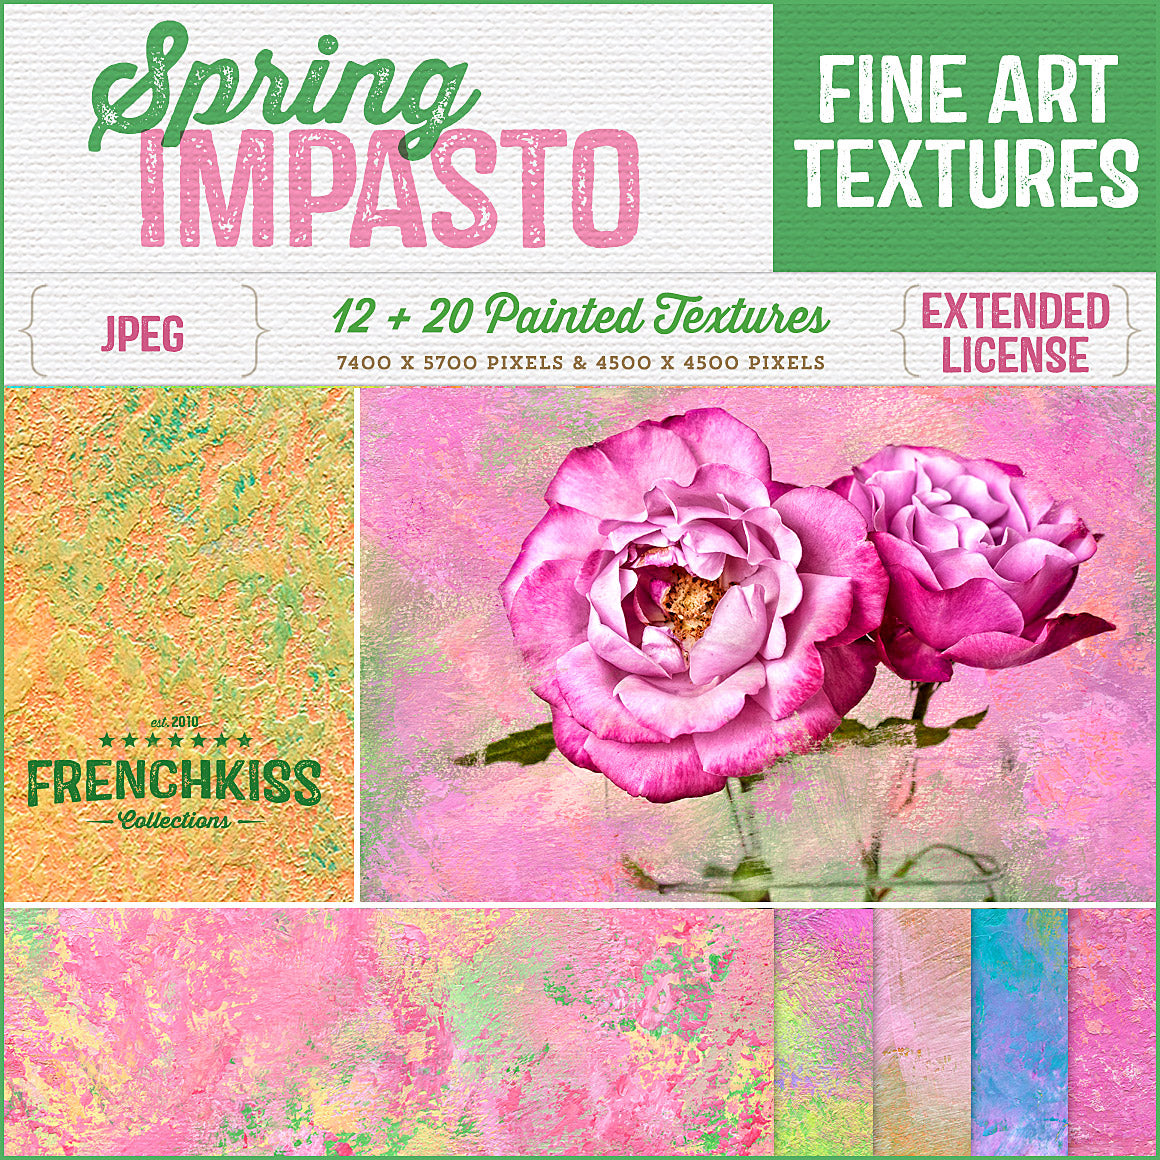 Spring Impasto hand-painted, fine art textures for commercial use.